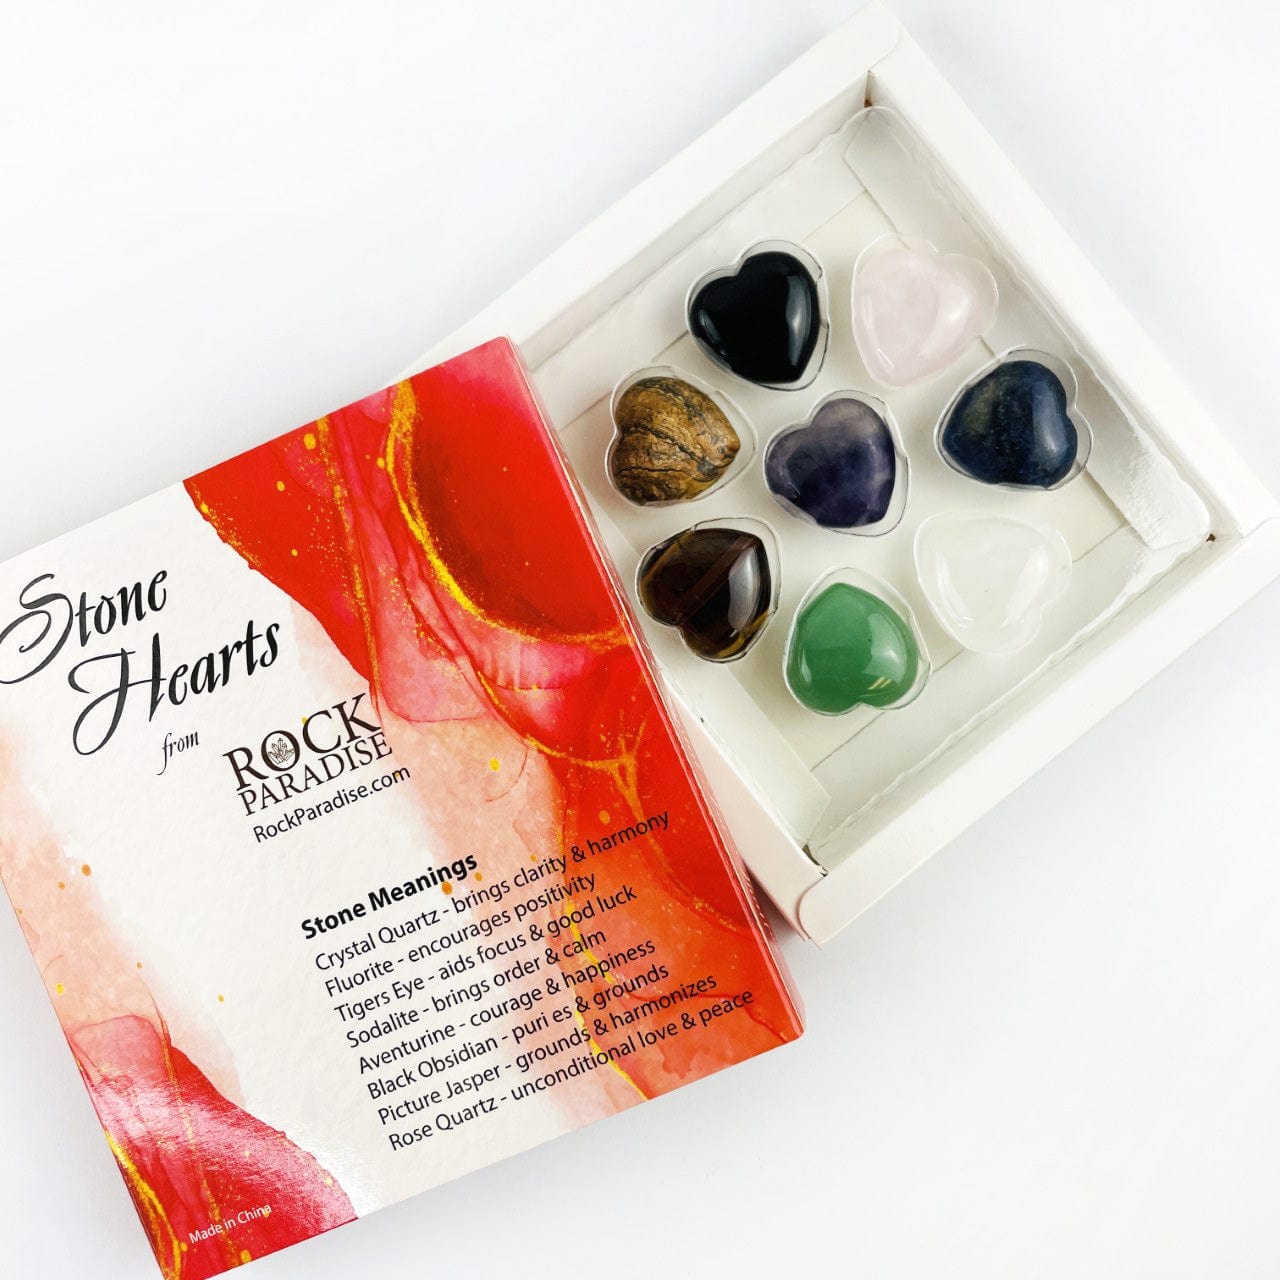 8 heart shaped stones in a opened box set